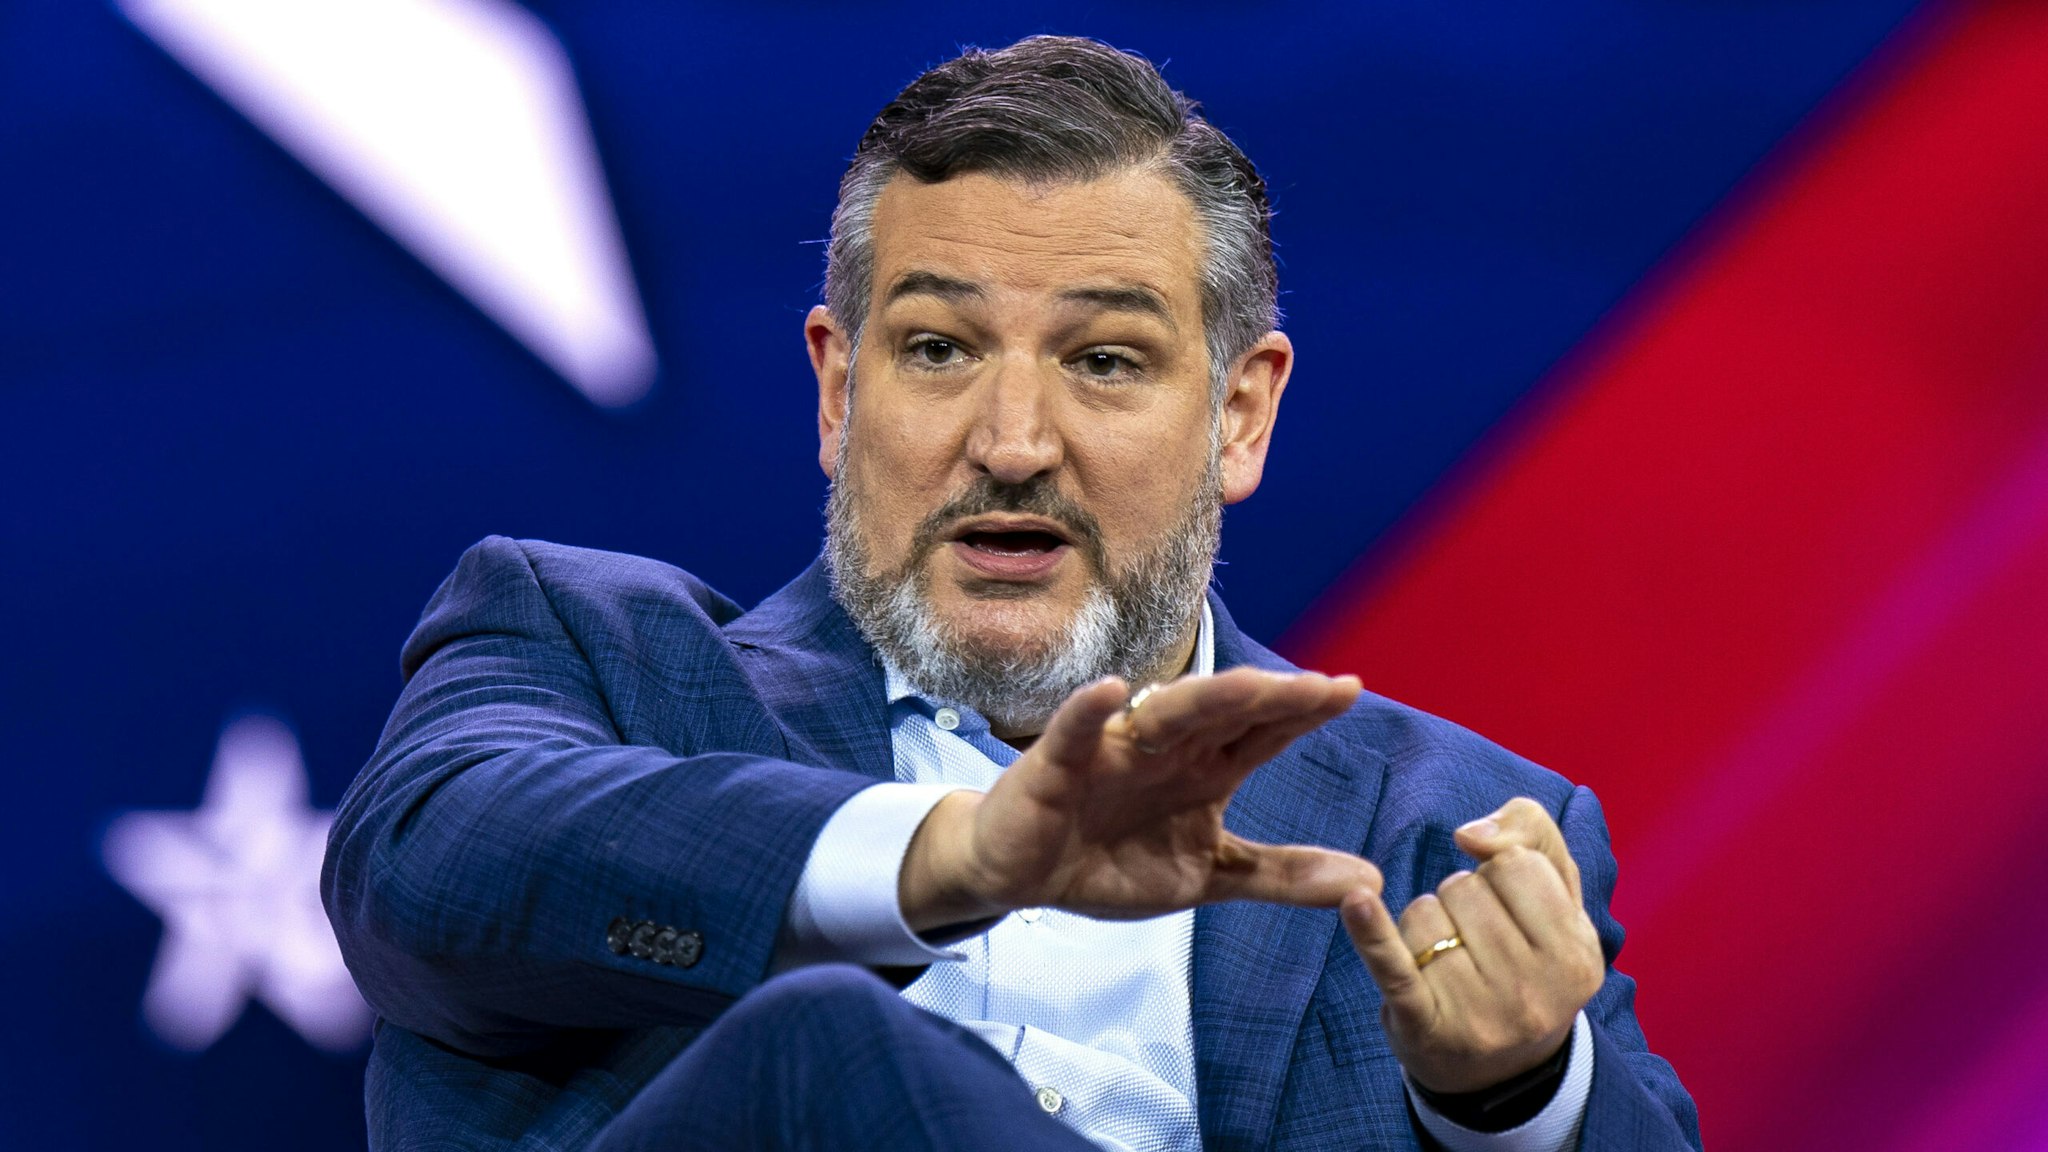 Senator Ted Cruz, a Republican from Texas, speaks during the Conservative Political Action Conference (CPAC) in National Harbor, Maryland, US, on Thursday, March 2, 2023. The Conservative Political Action Conference launched in 1974 brings together conservative organizations, elected leaders, and activists.